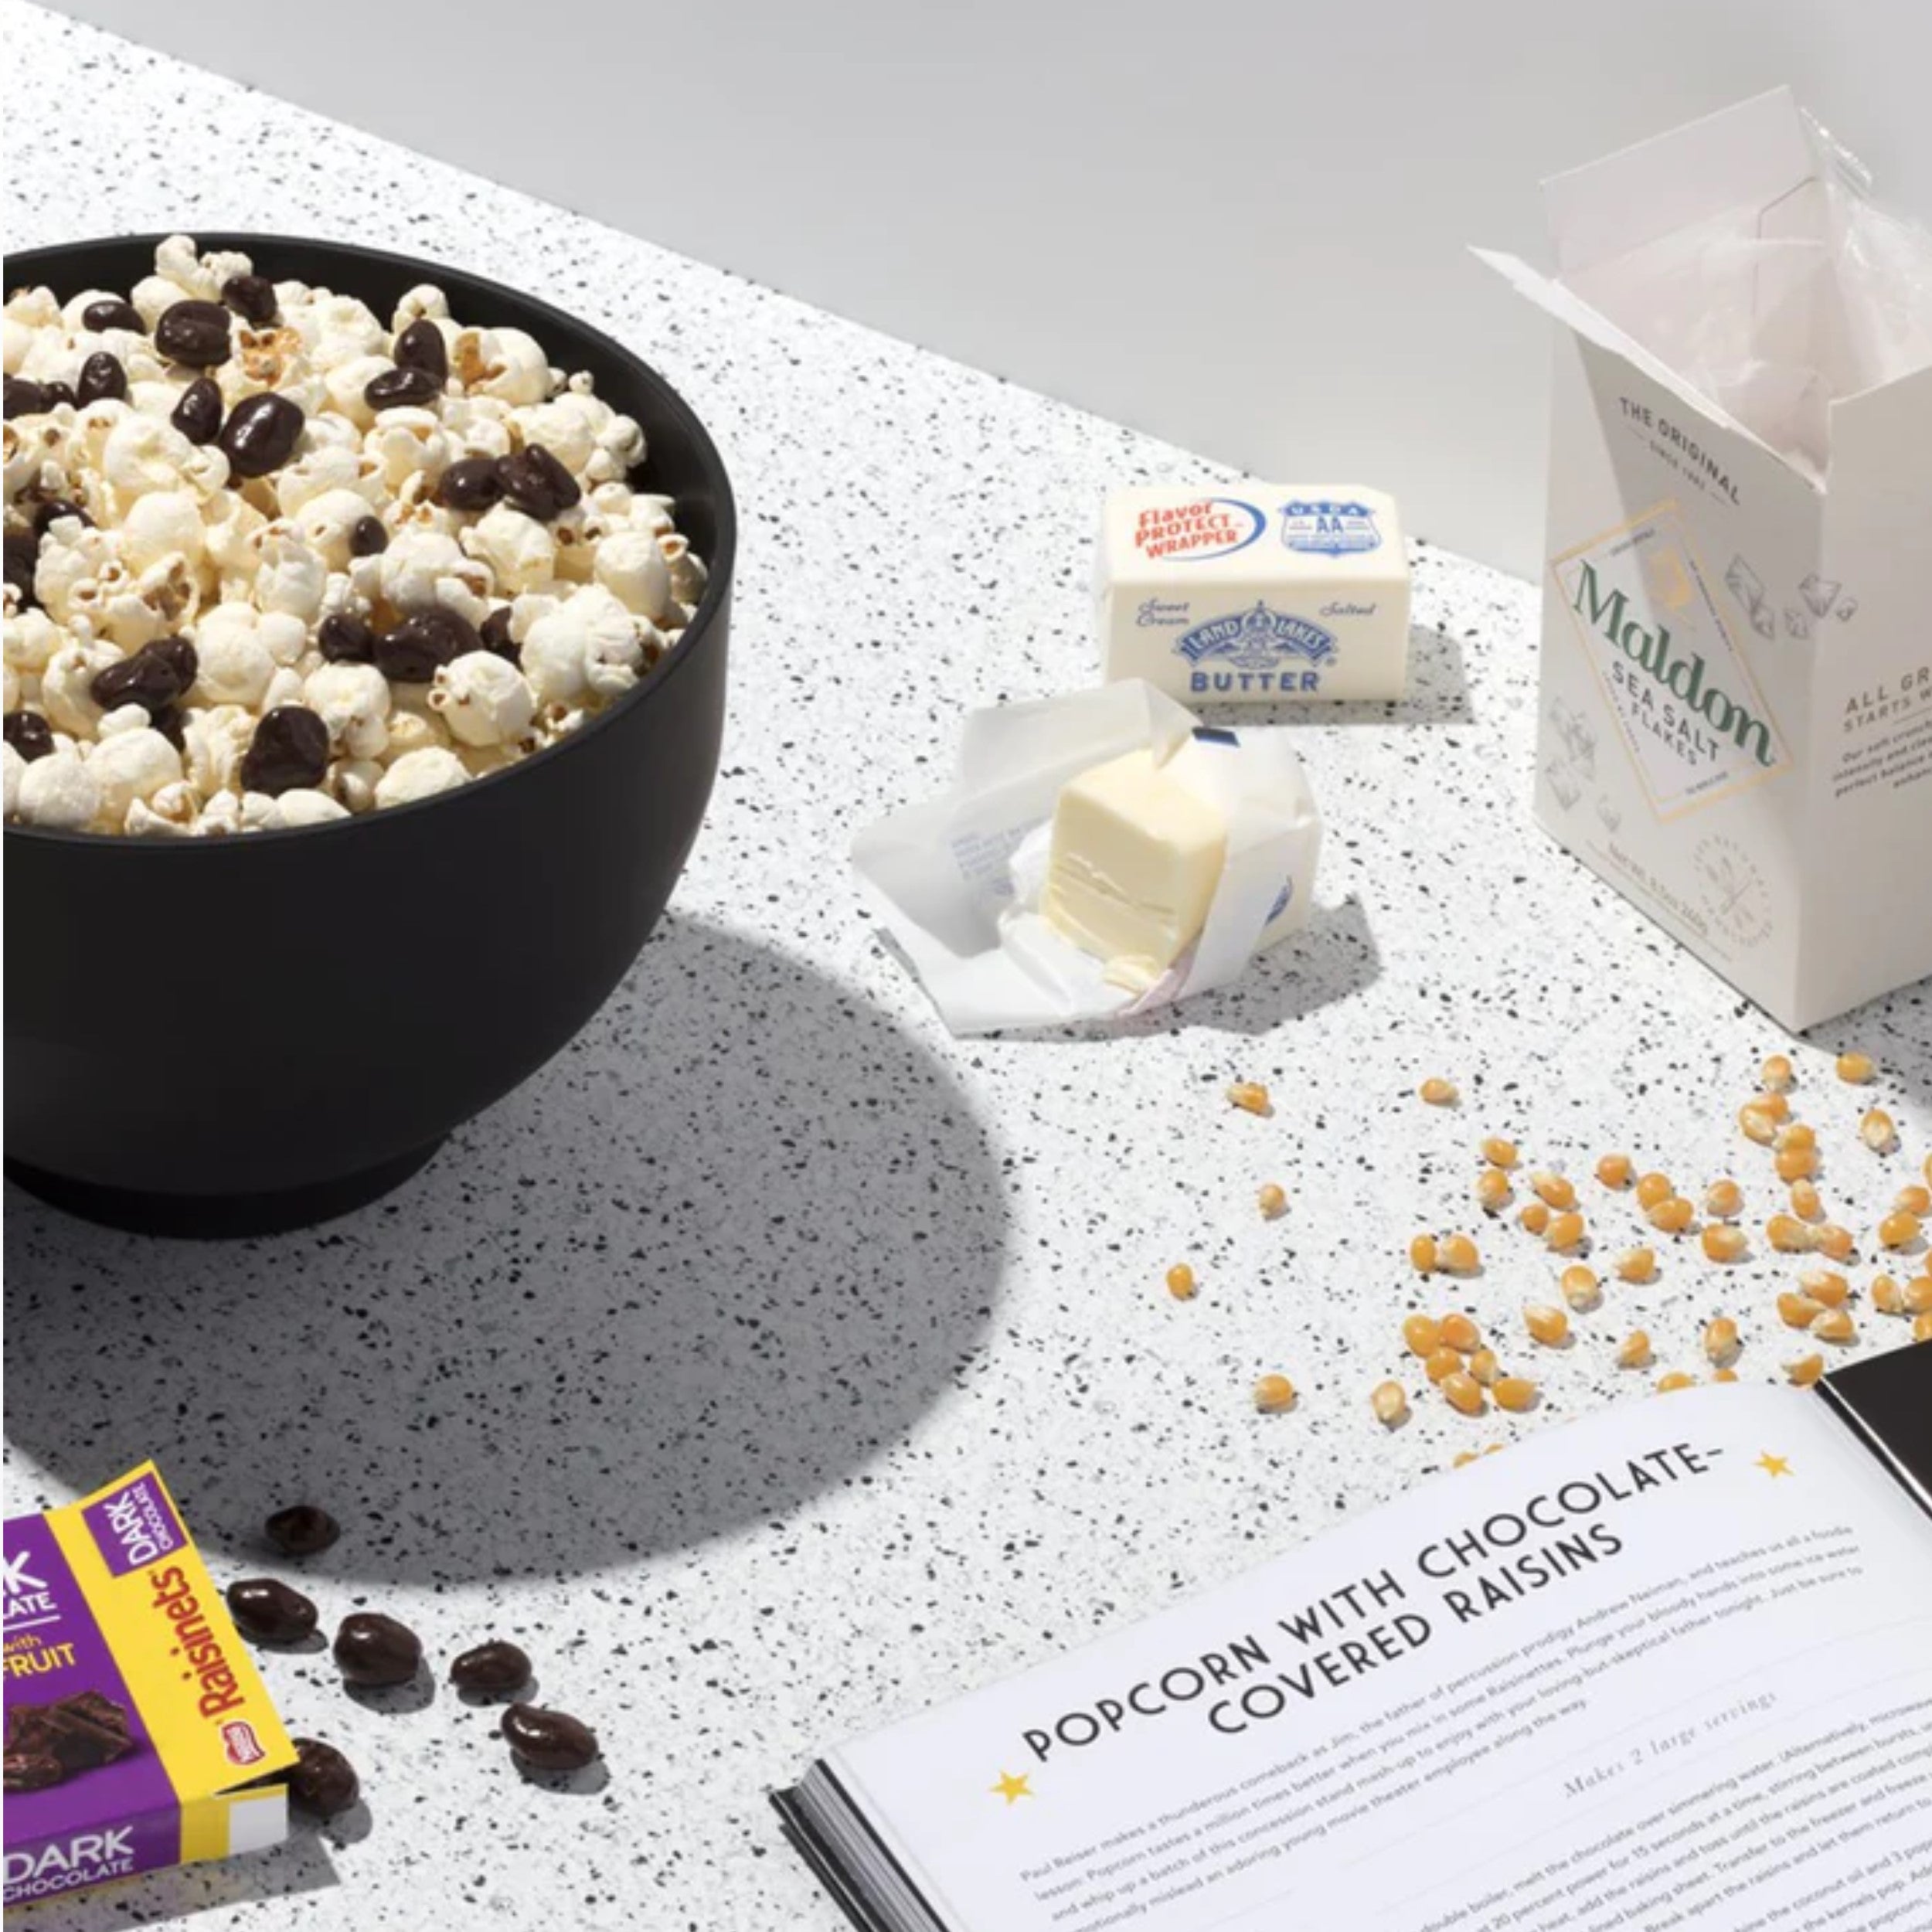 white speckled counter with silicone bowl of popcorn and chocolate raisins at top left corner, below is corner of purple and yellow box of chocolate raisins, right side top is box of maldon salt  and two butter bricks, below loose popcorn kernels and at bottom is a cook book open with a recipe  